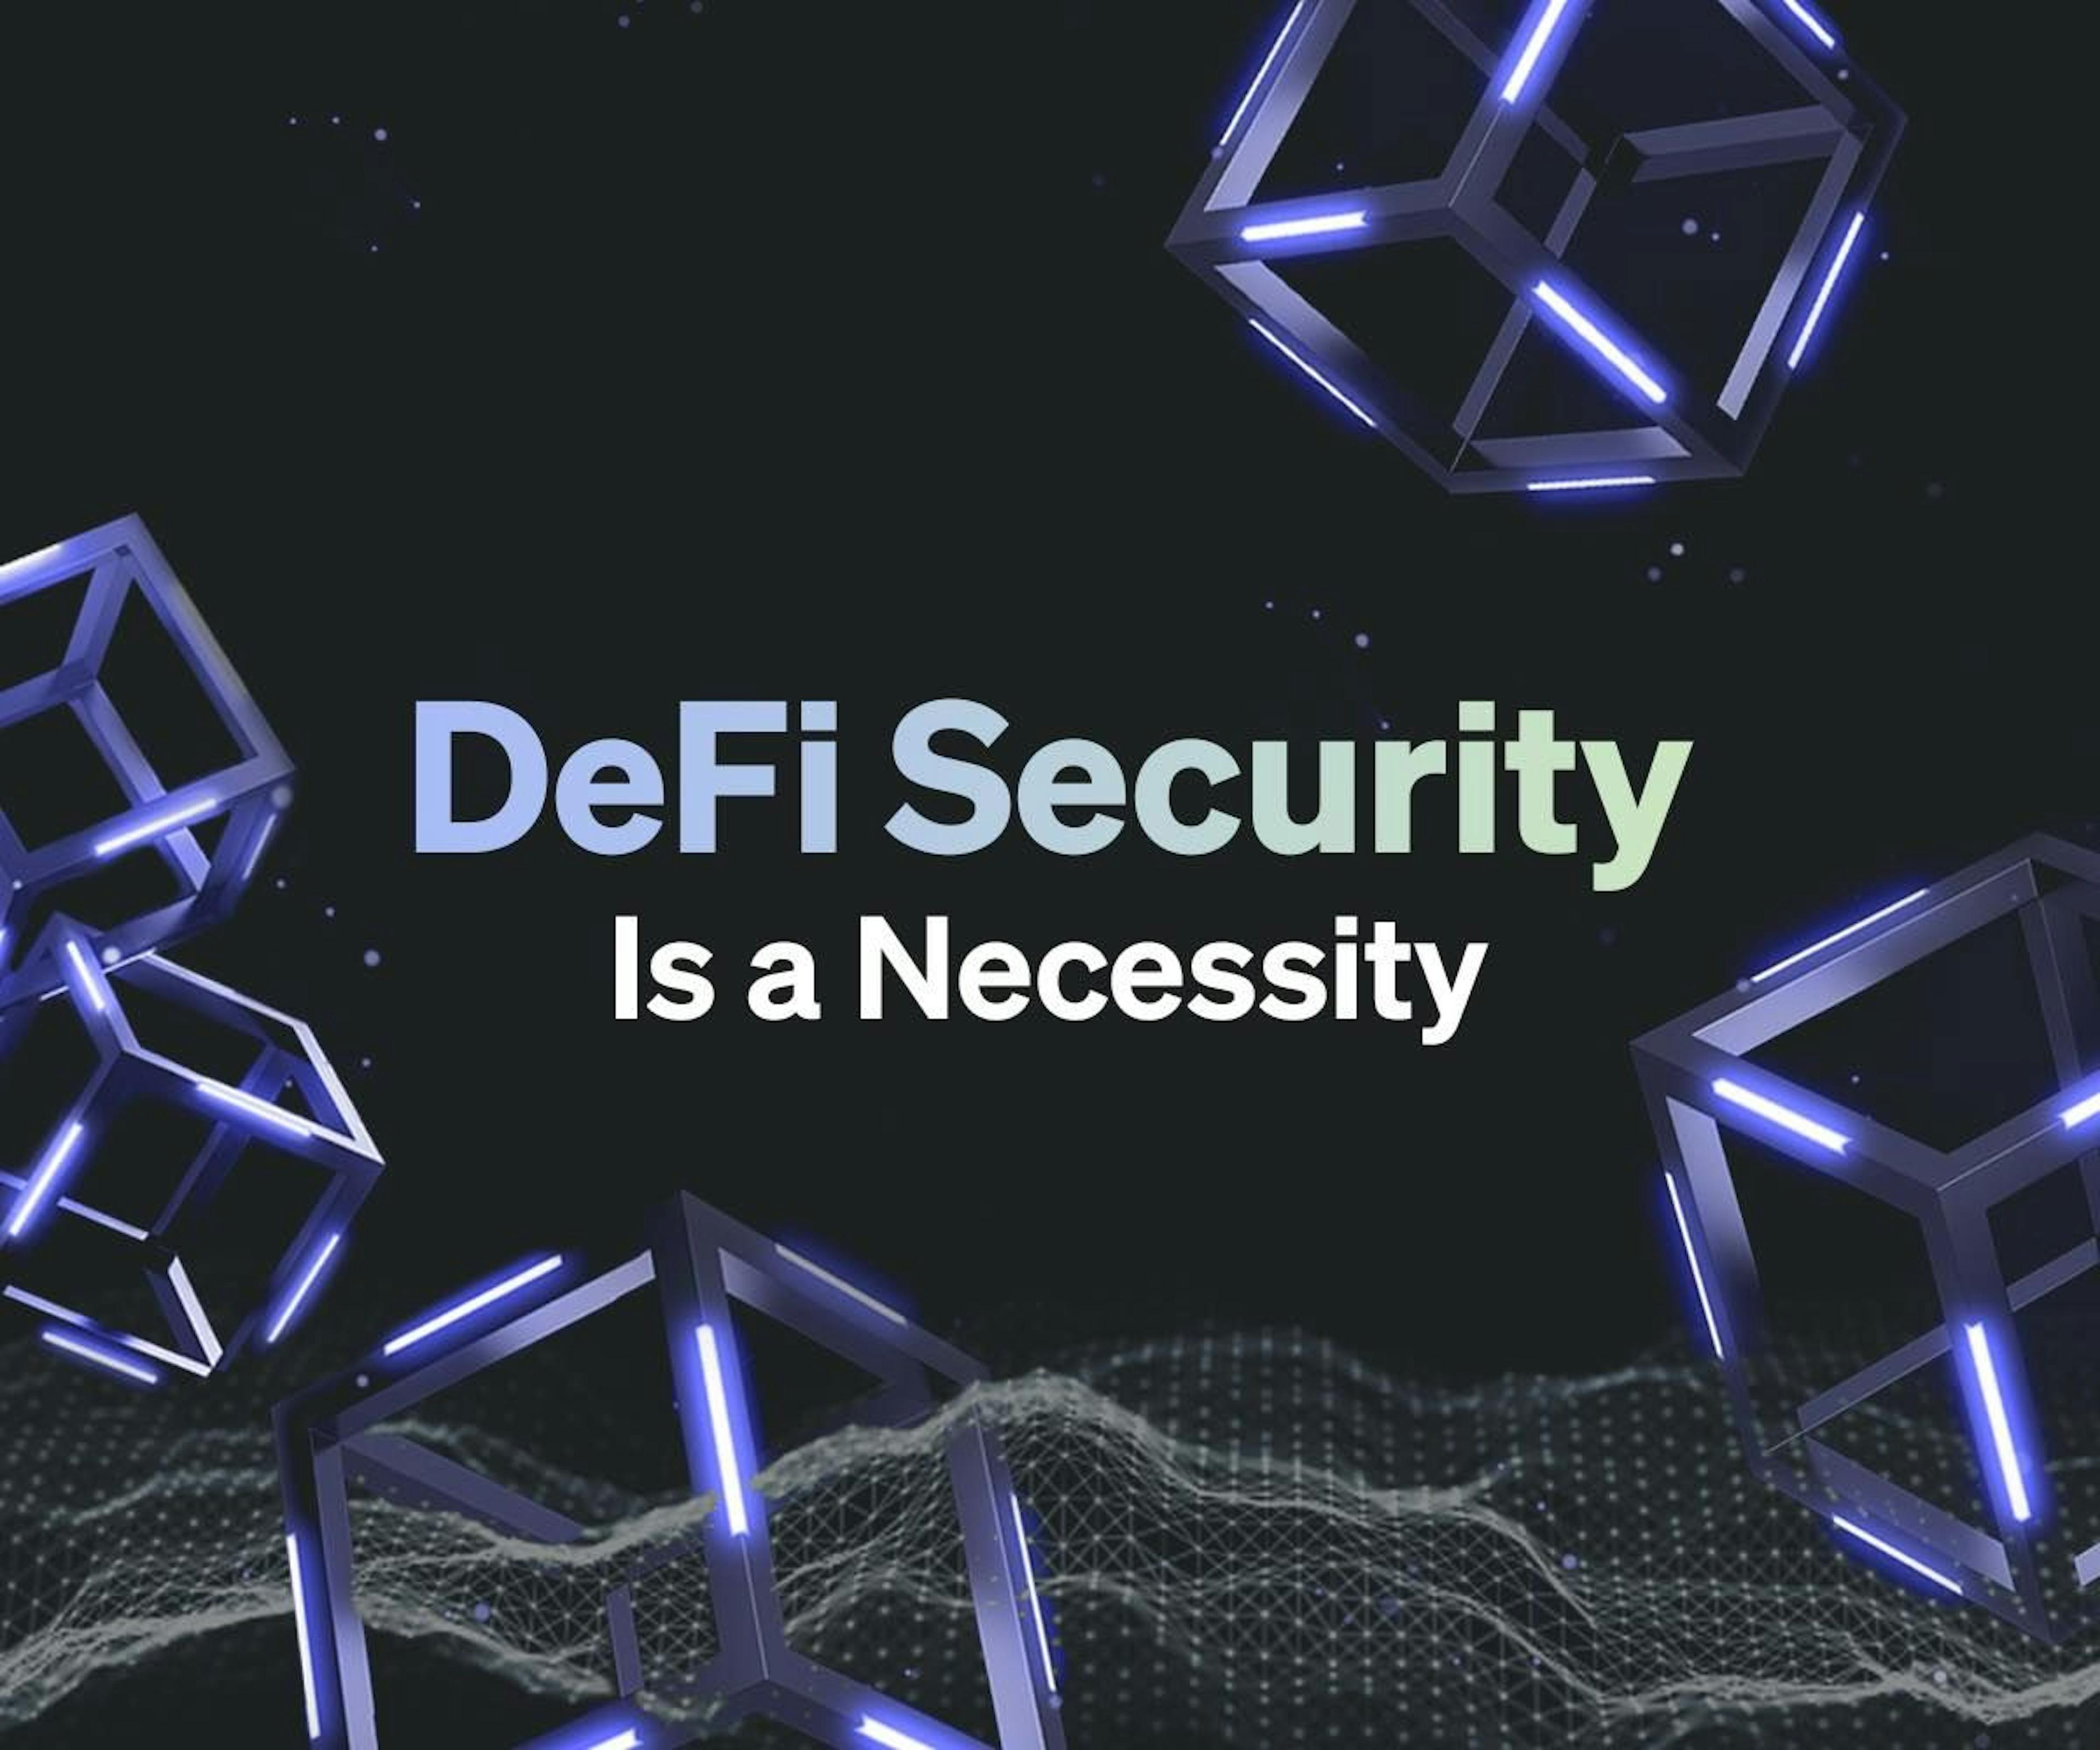 /defi-security-isnt-just-a-trend-its-a-necessity-for-everyone feature image